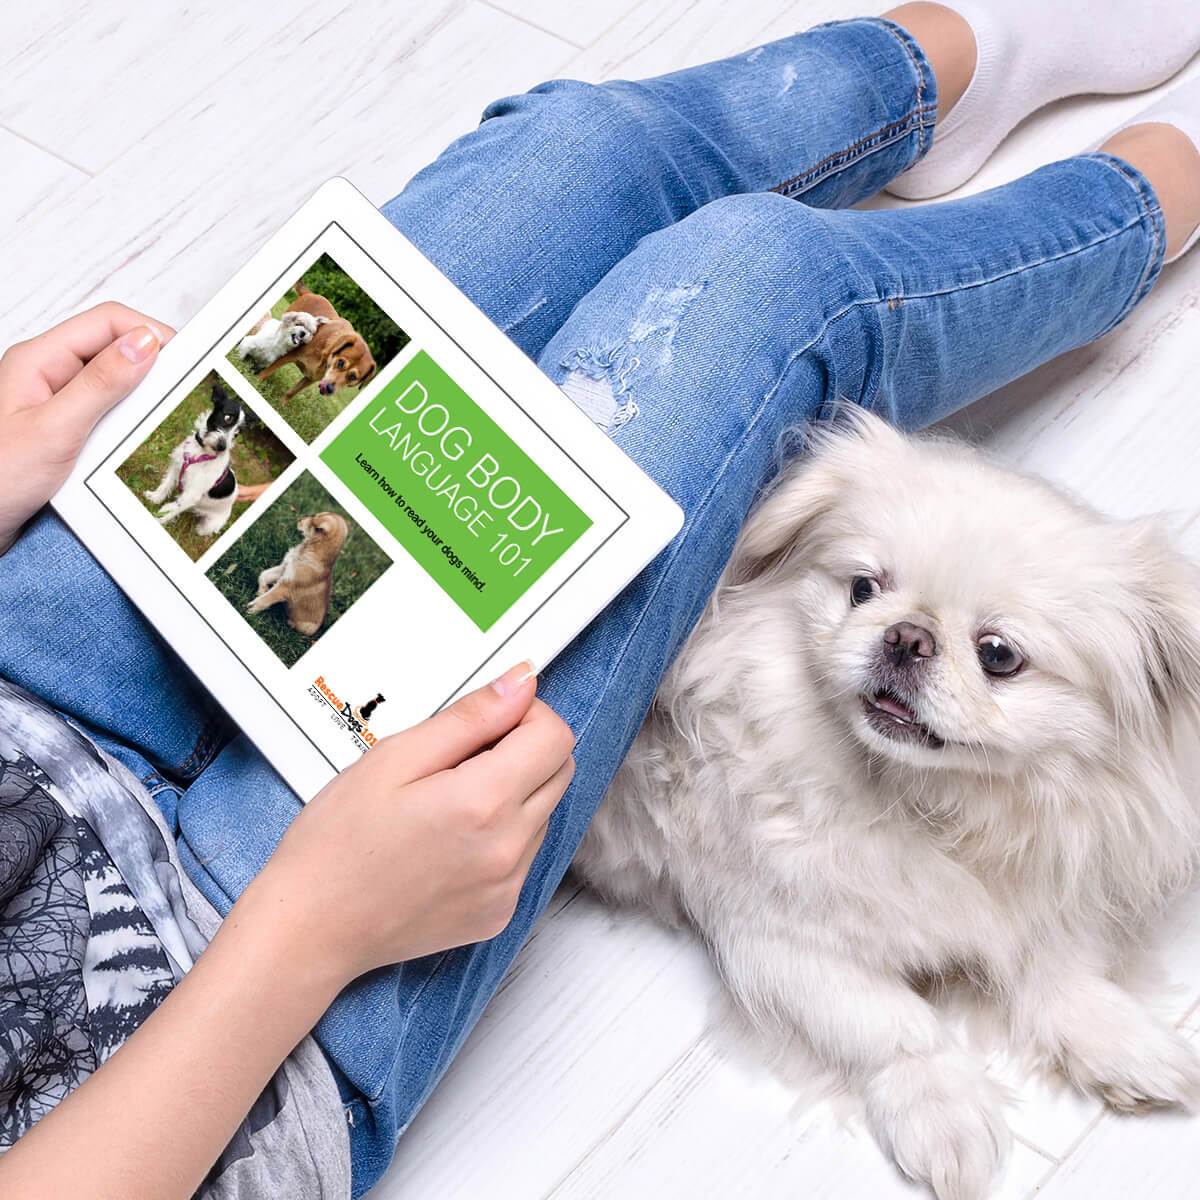 woman sitting on floor with dog reading dog body language book on tablet